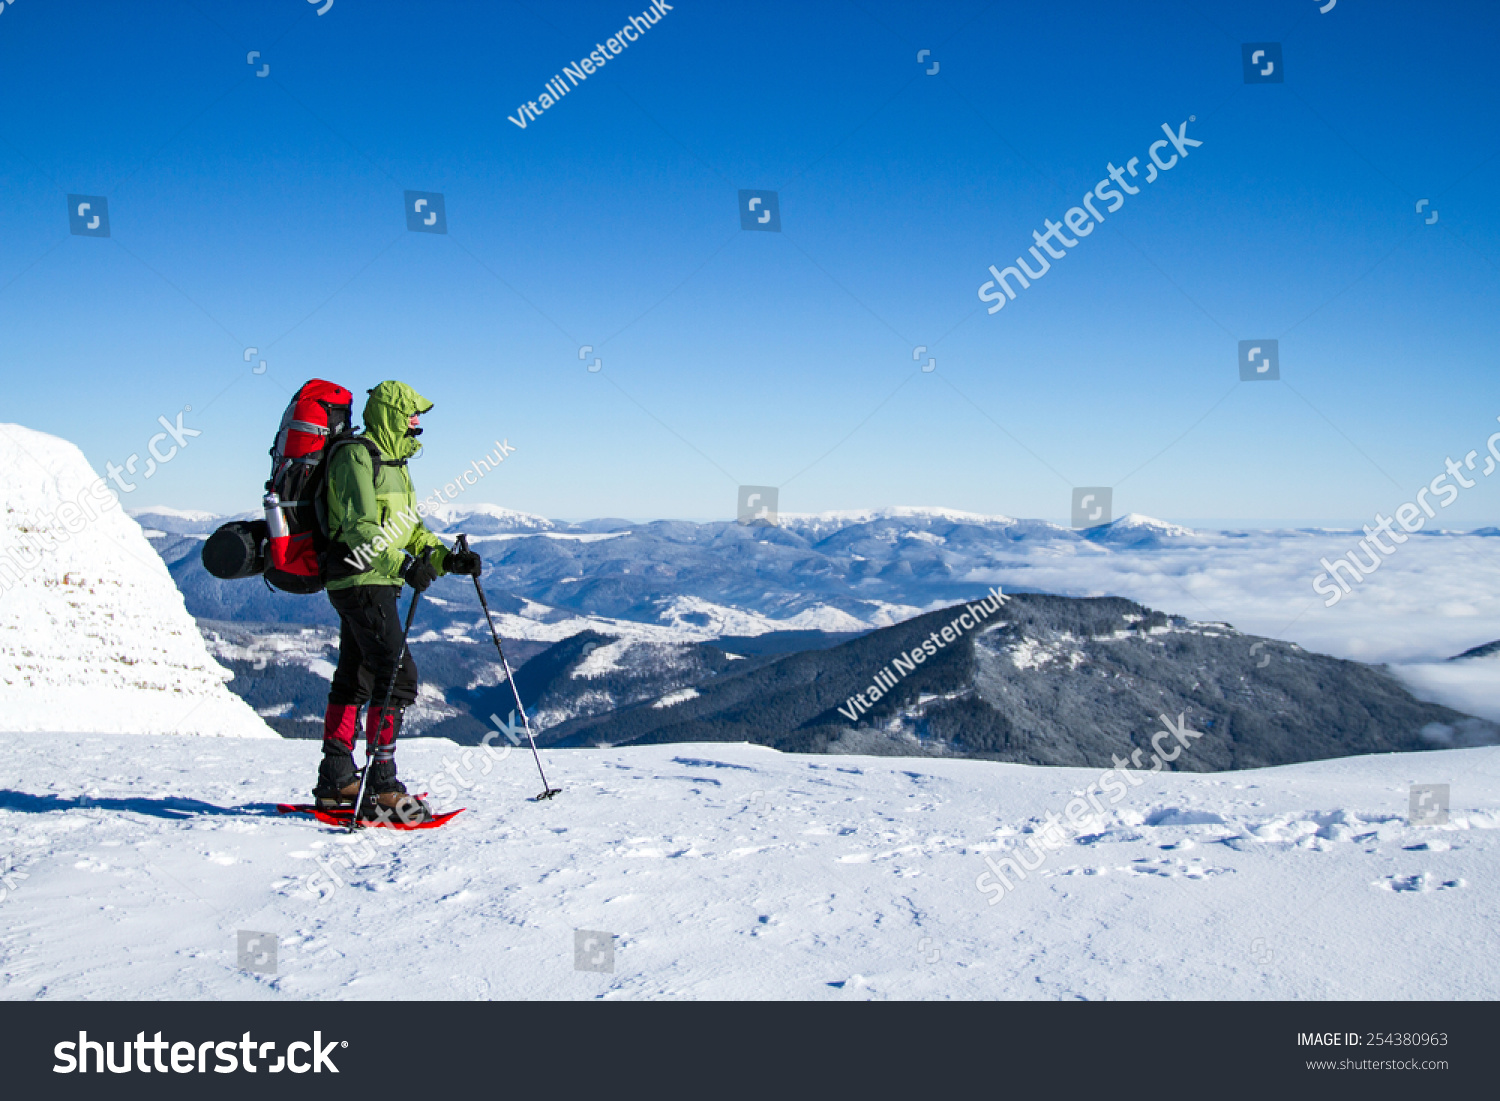 Winter hiking in the mountains on snowshoes with a backpack and tent. #254380963